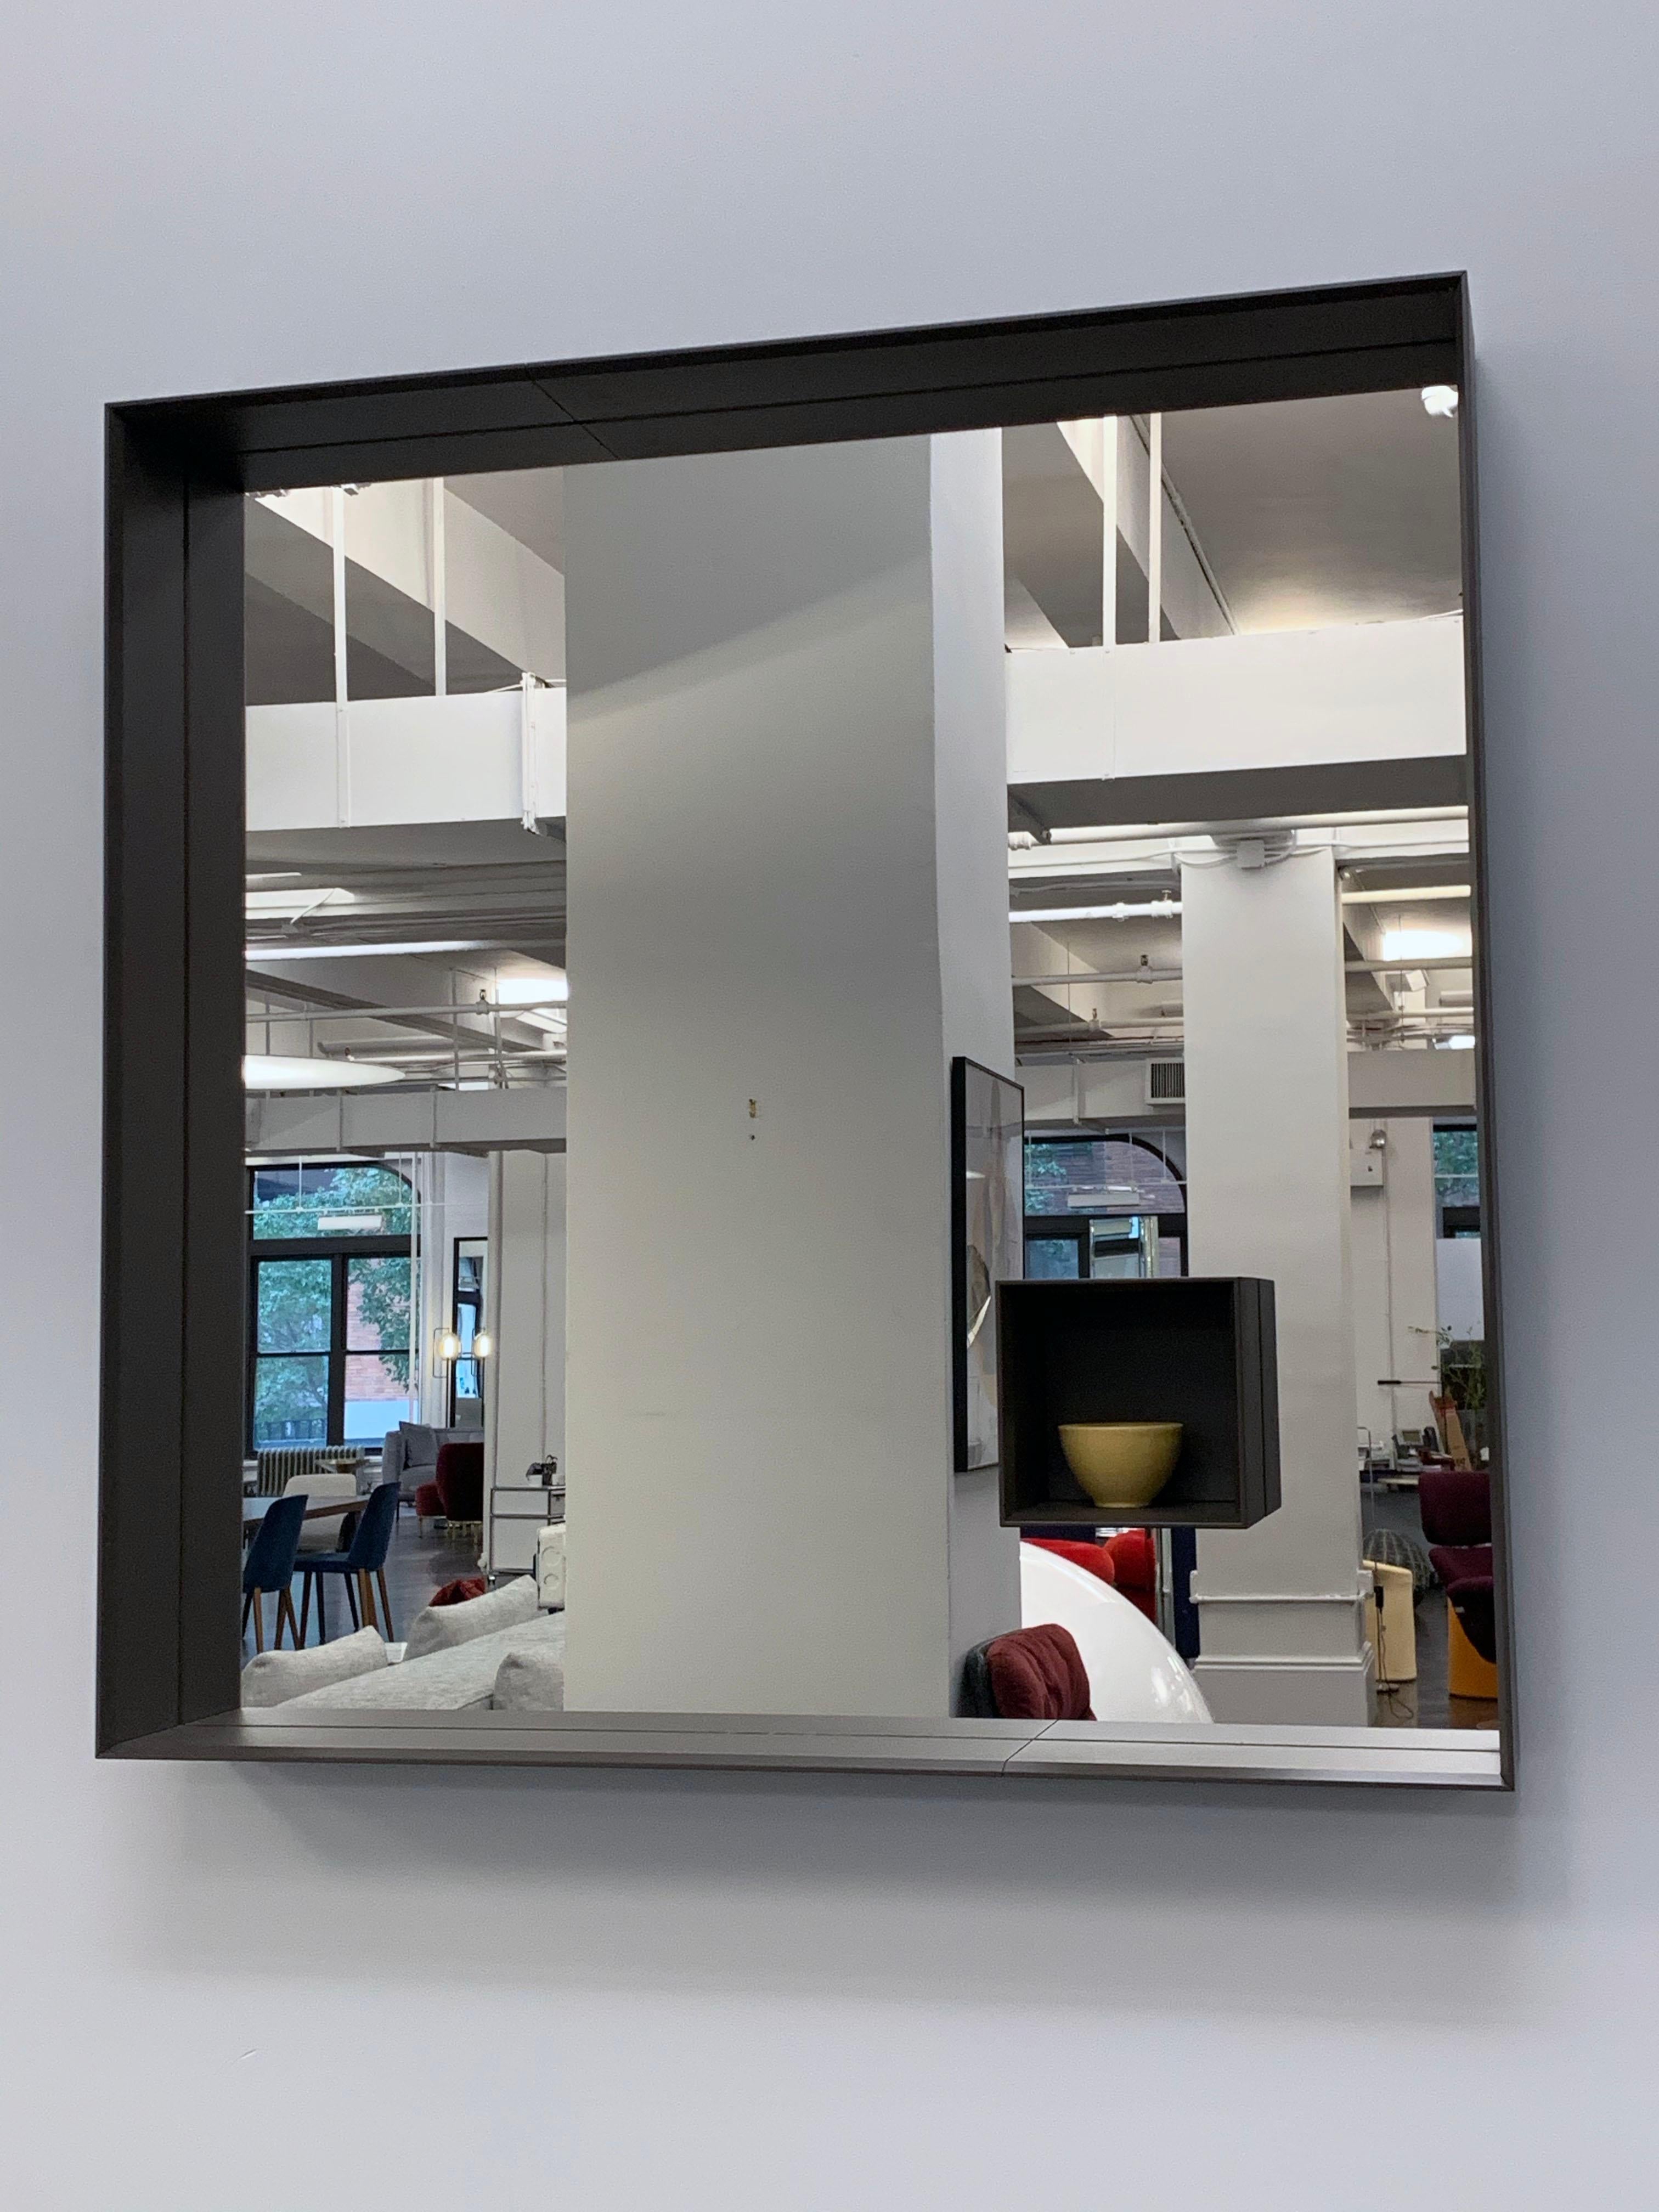 Mir mirror
Measures: 90 x 90 cm
Frame finish: Marrone Bungee (Bungee Brown)
clove compartment marrone bungee
Designed by Marco Acerbis • 2017
A formal frame: this is a mirror which combines a visual aspect, created by the balance between the